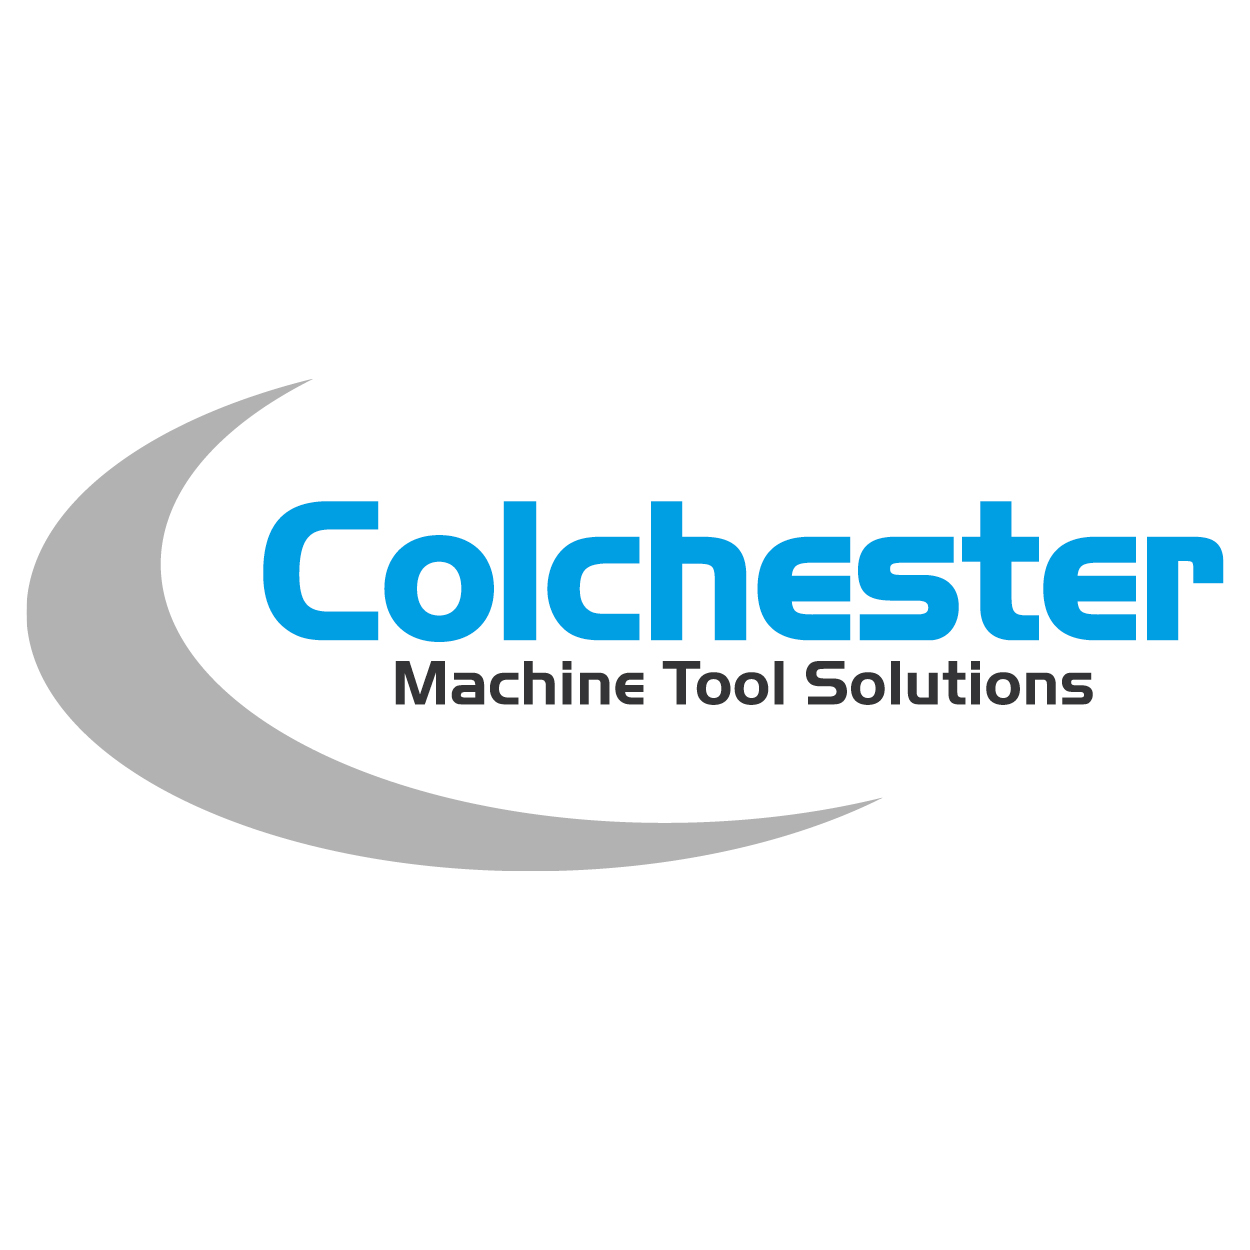 COLCHESTER MACHINE TOOL SOLUTIONS Logo